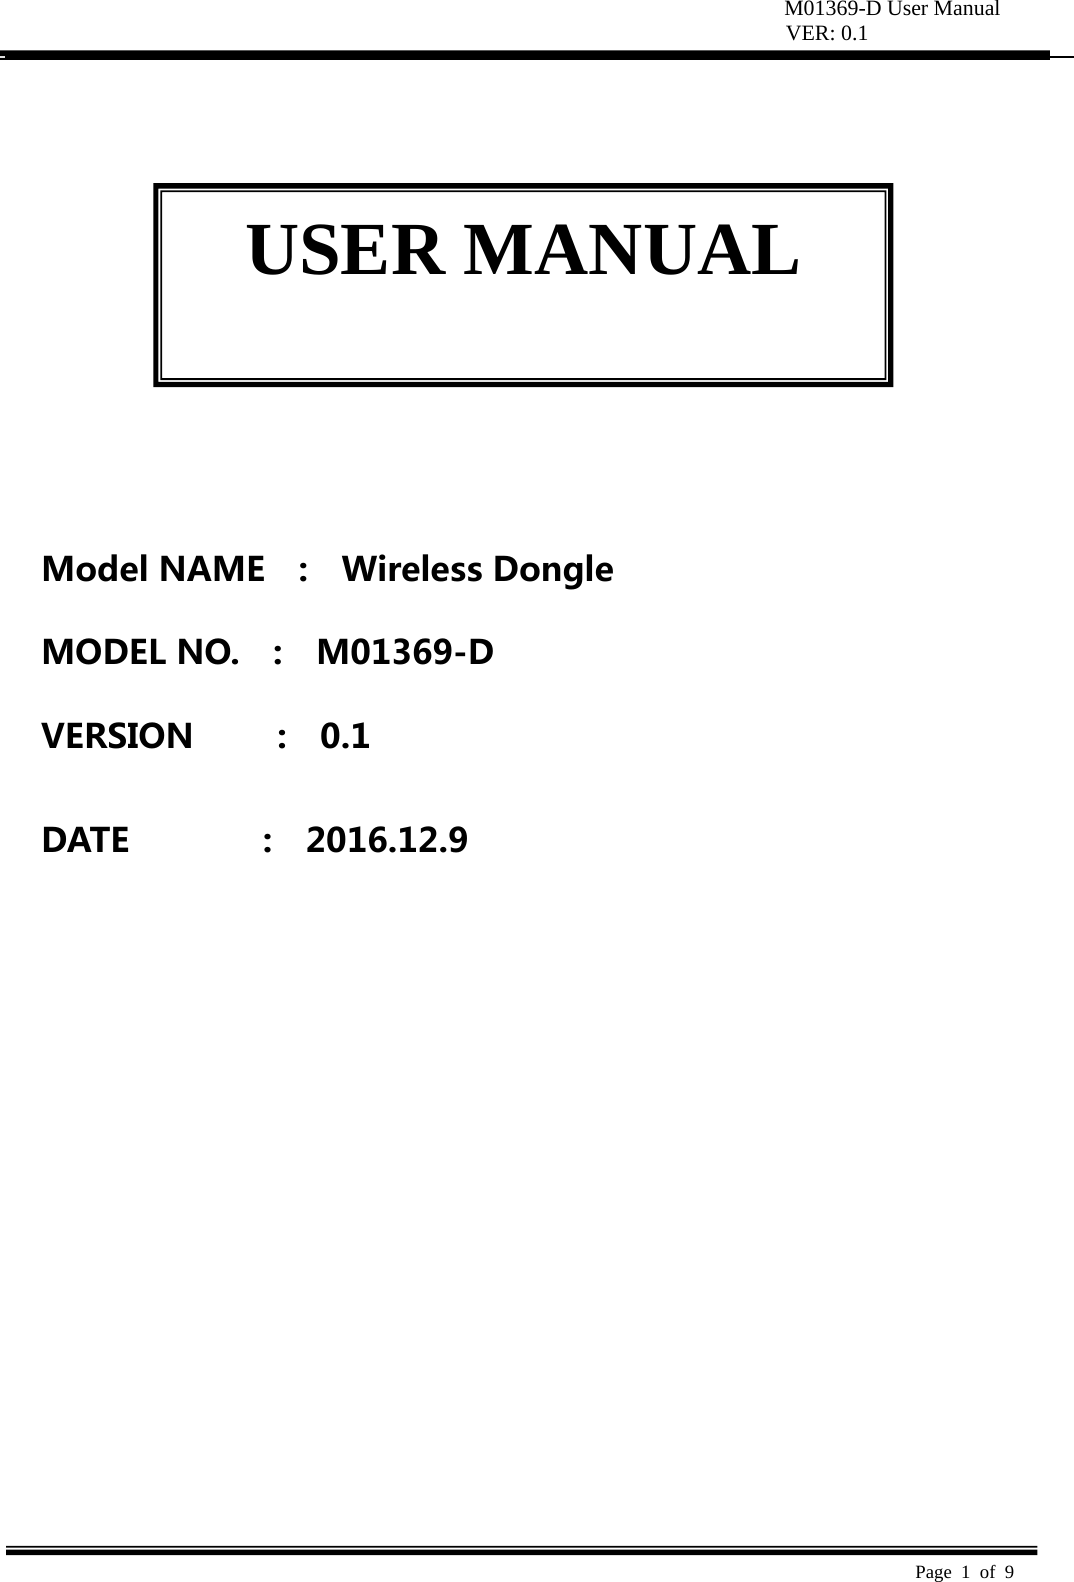 M01369-D User Manual VER: 0.1  Page 1 of 9            ModelNAME  :  WirelessDongleMODELNO.:M01369-DVERSION:0.1DATE:2016.12.9USER MANUAL 